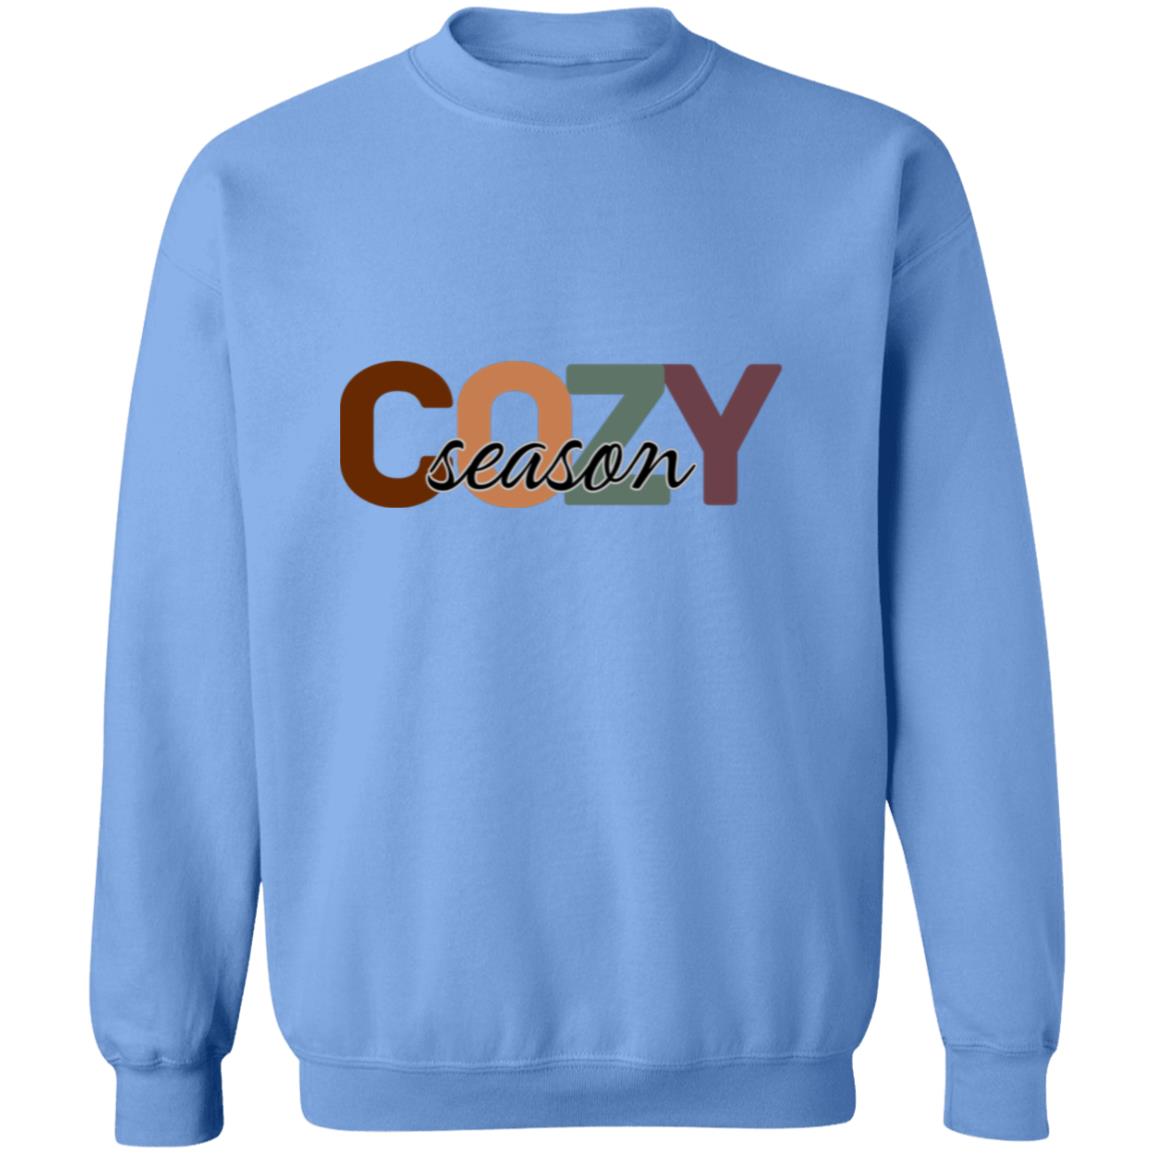 Get trendy with Cozy Season Crewneck Pullover Sweatshirt - Sweatshirts available at Good Gift Company. Grab yours for $21.95 today!